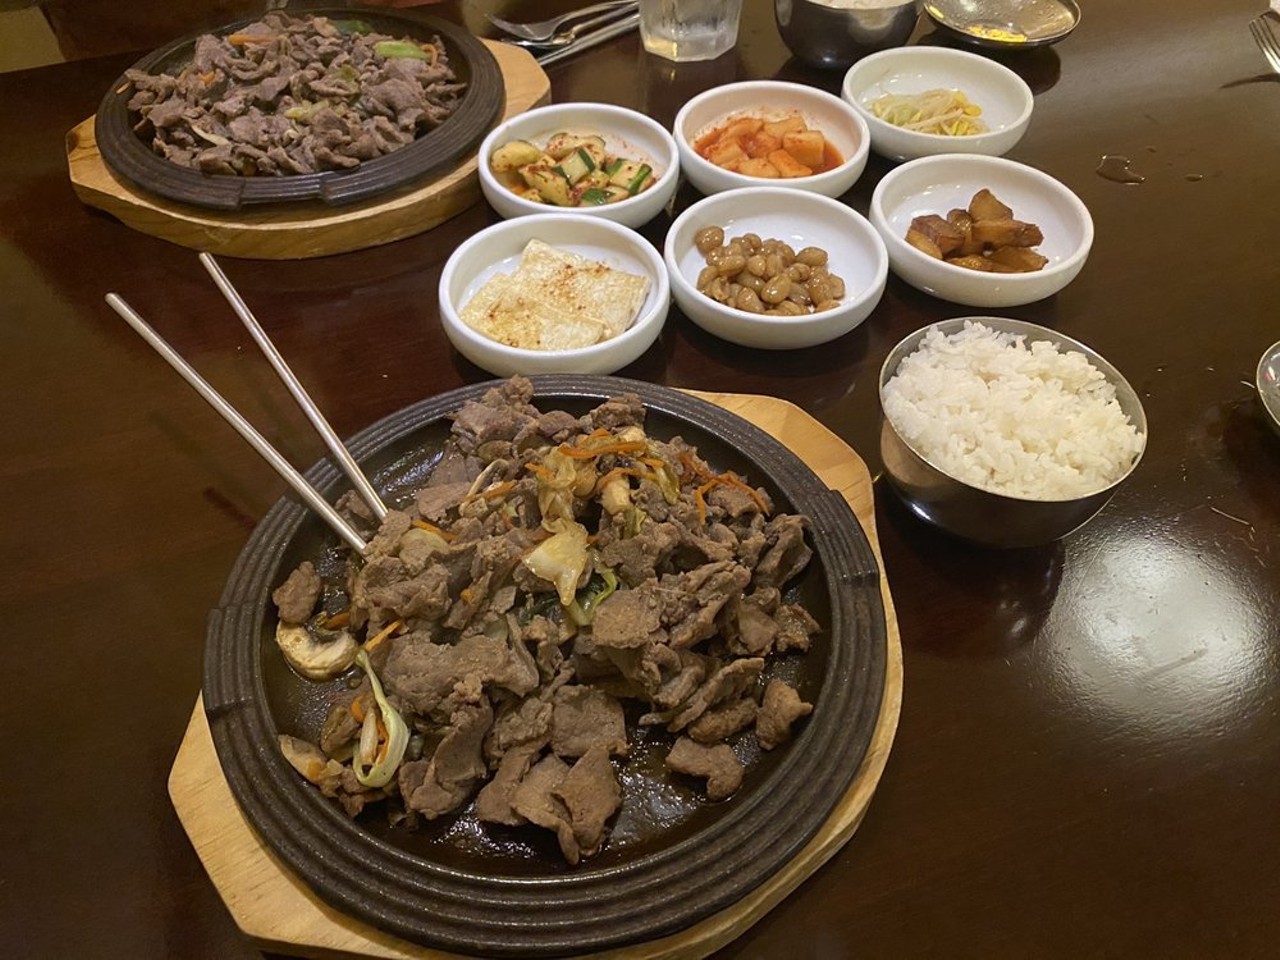 Lee&#146;s Korean
1941 Bishop Ln, Suite 107 
Lee&#146;s Korean has plenty of Korean cuisine options, with lots of appetizers, platters, soup, stir fry and casserole.  Photo via  Emily S. taken from Yelp 